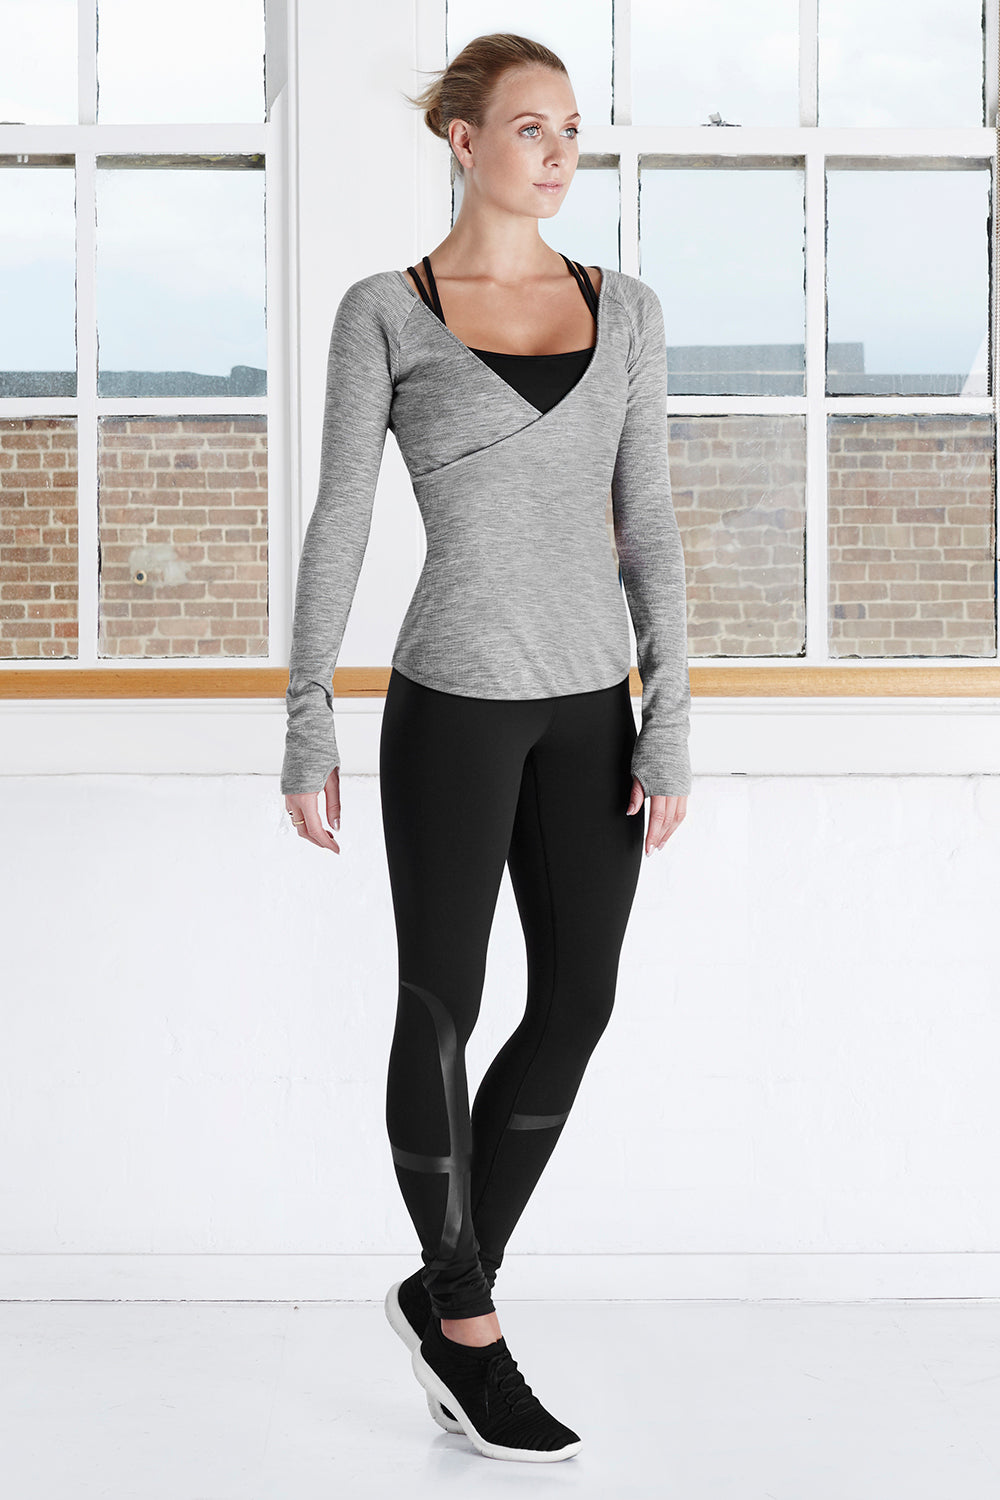 A female dancer in the studio wearing the BLOCH Ladies wrap front top with leggings and active top